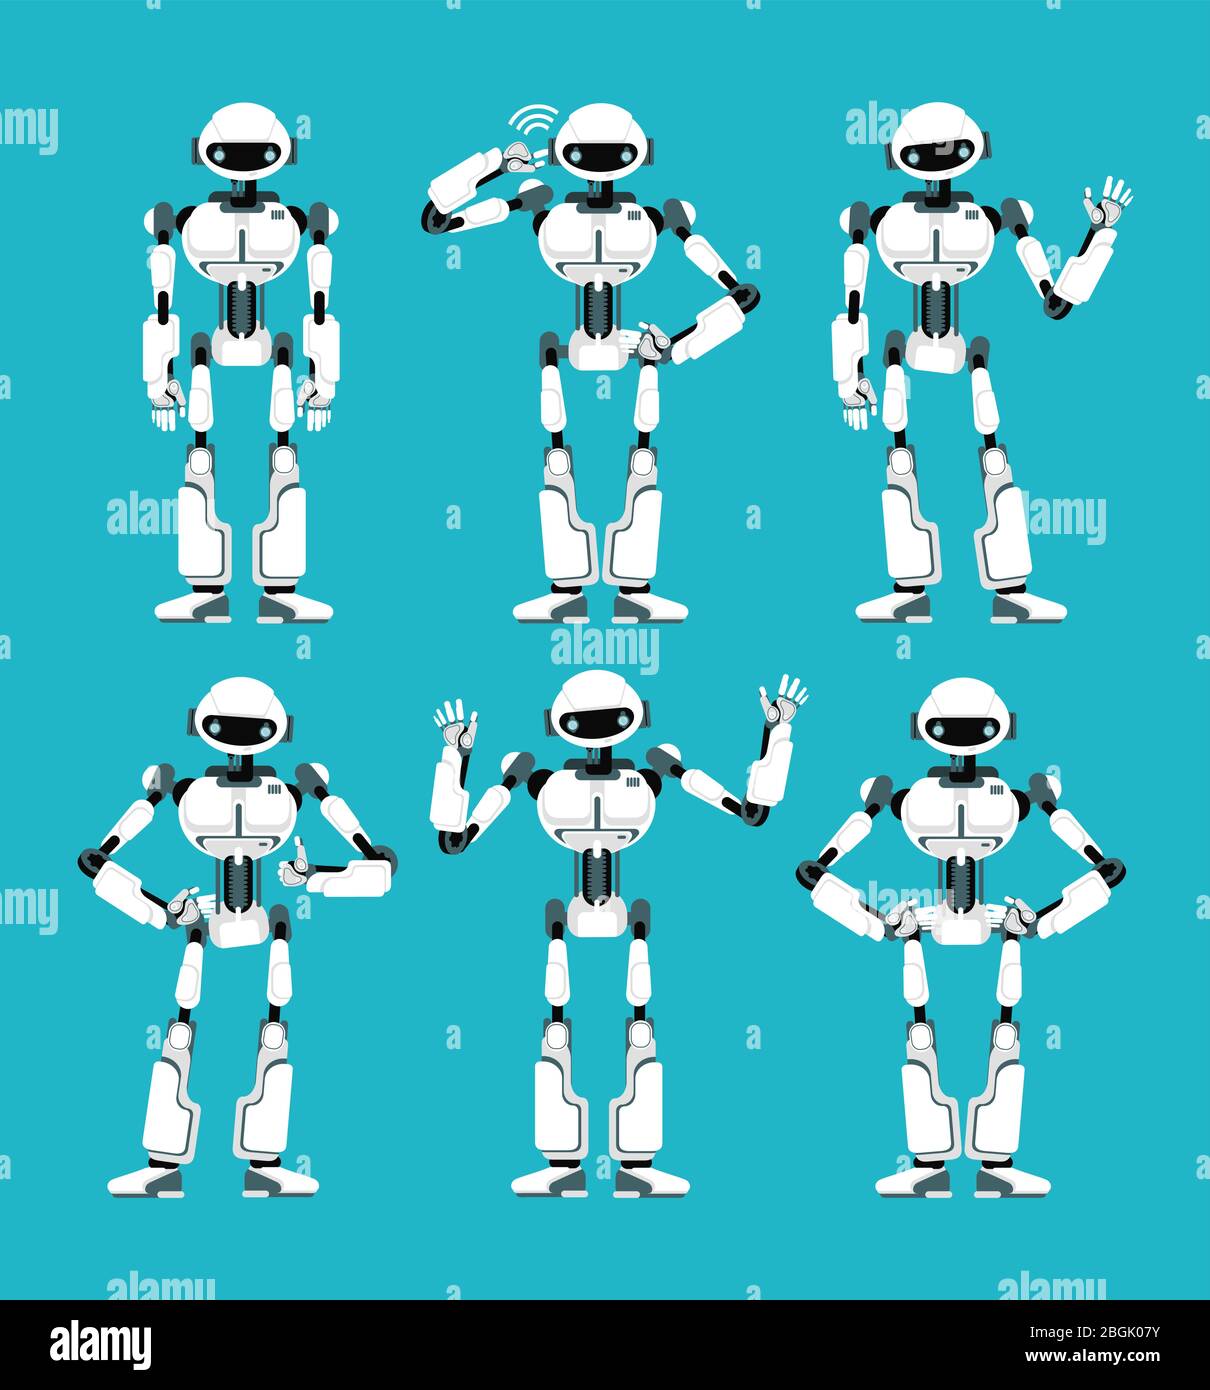 Spaceman robot android in different poses. Cute cartoon futuristic humanoid character set. Cyborg robotic machine, toy futuristic mechanical. Vector illustration Stock Vector